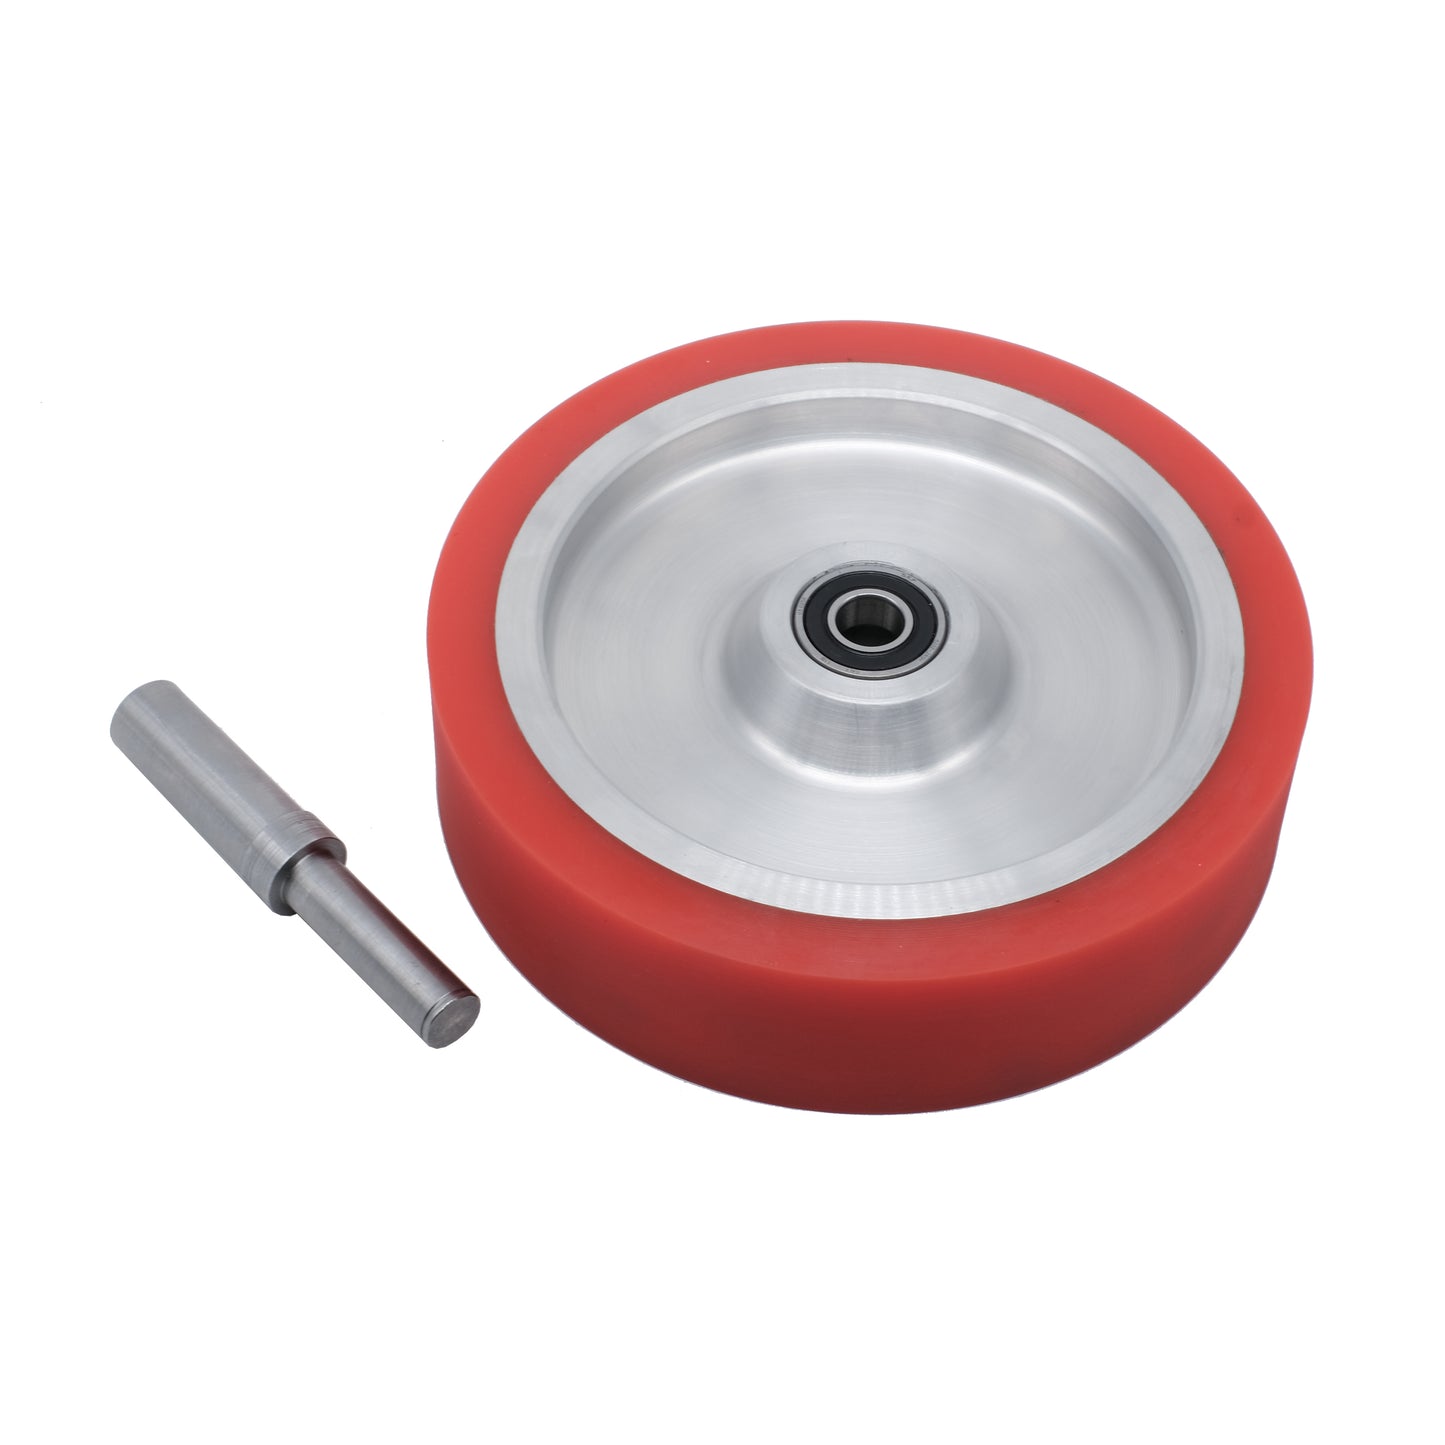 TR MAKER 7” 50x180mm Contact Wheel, 2x72 knife grinder Red color